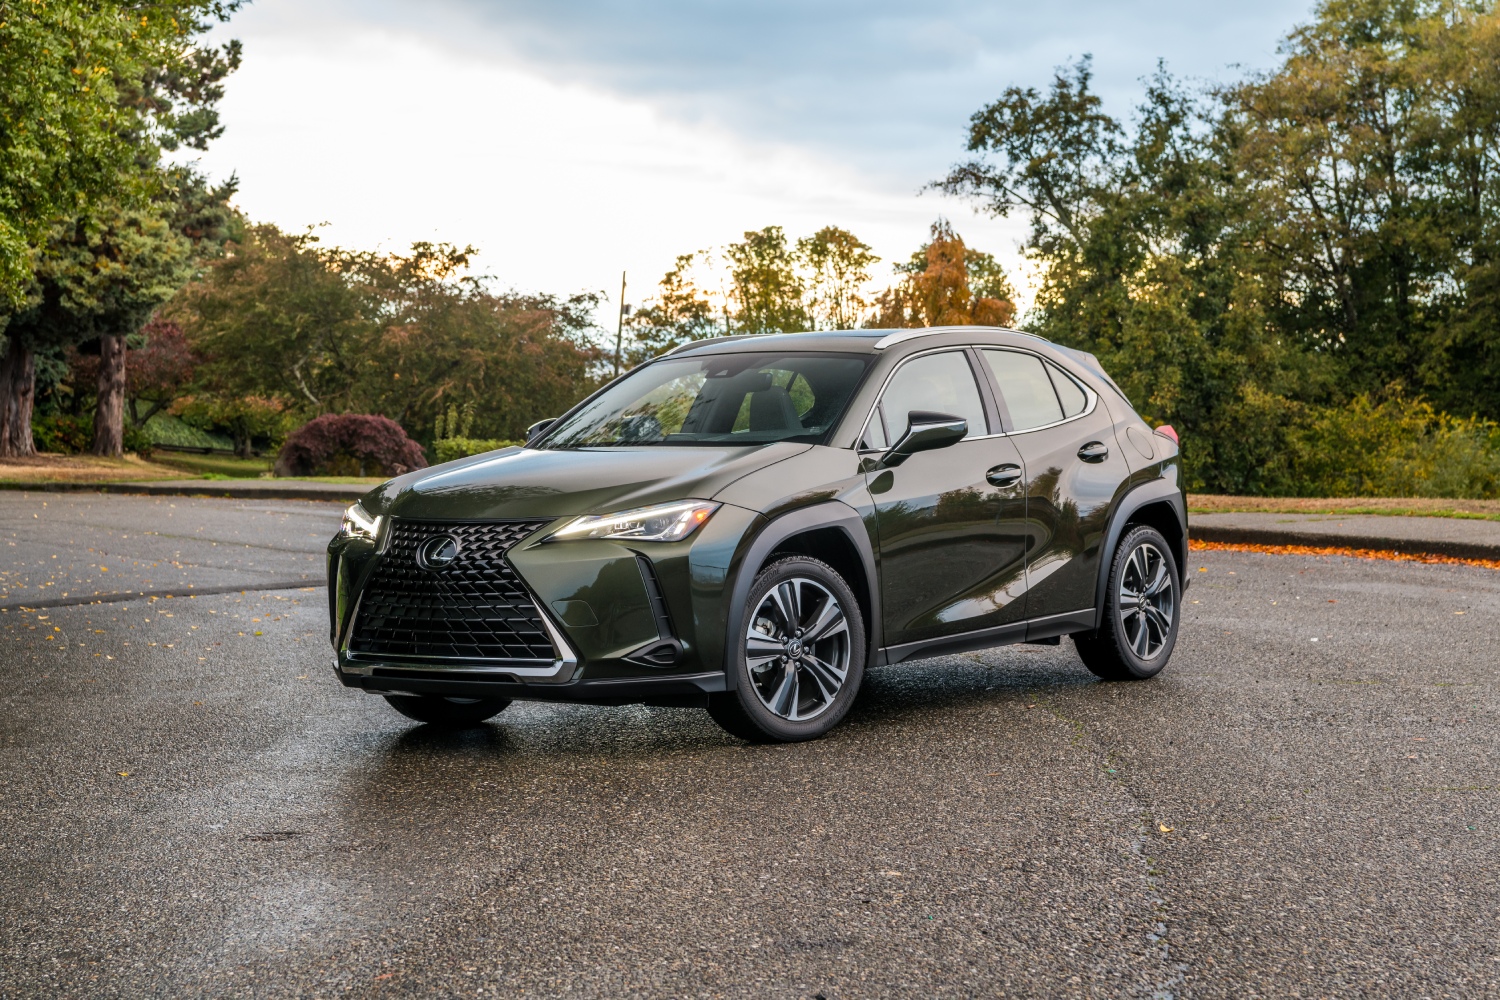 These small luxury SUVs under $30,000 include the Lexus UX